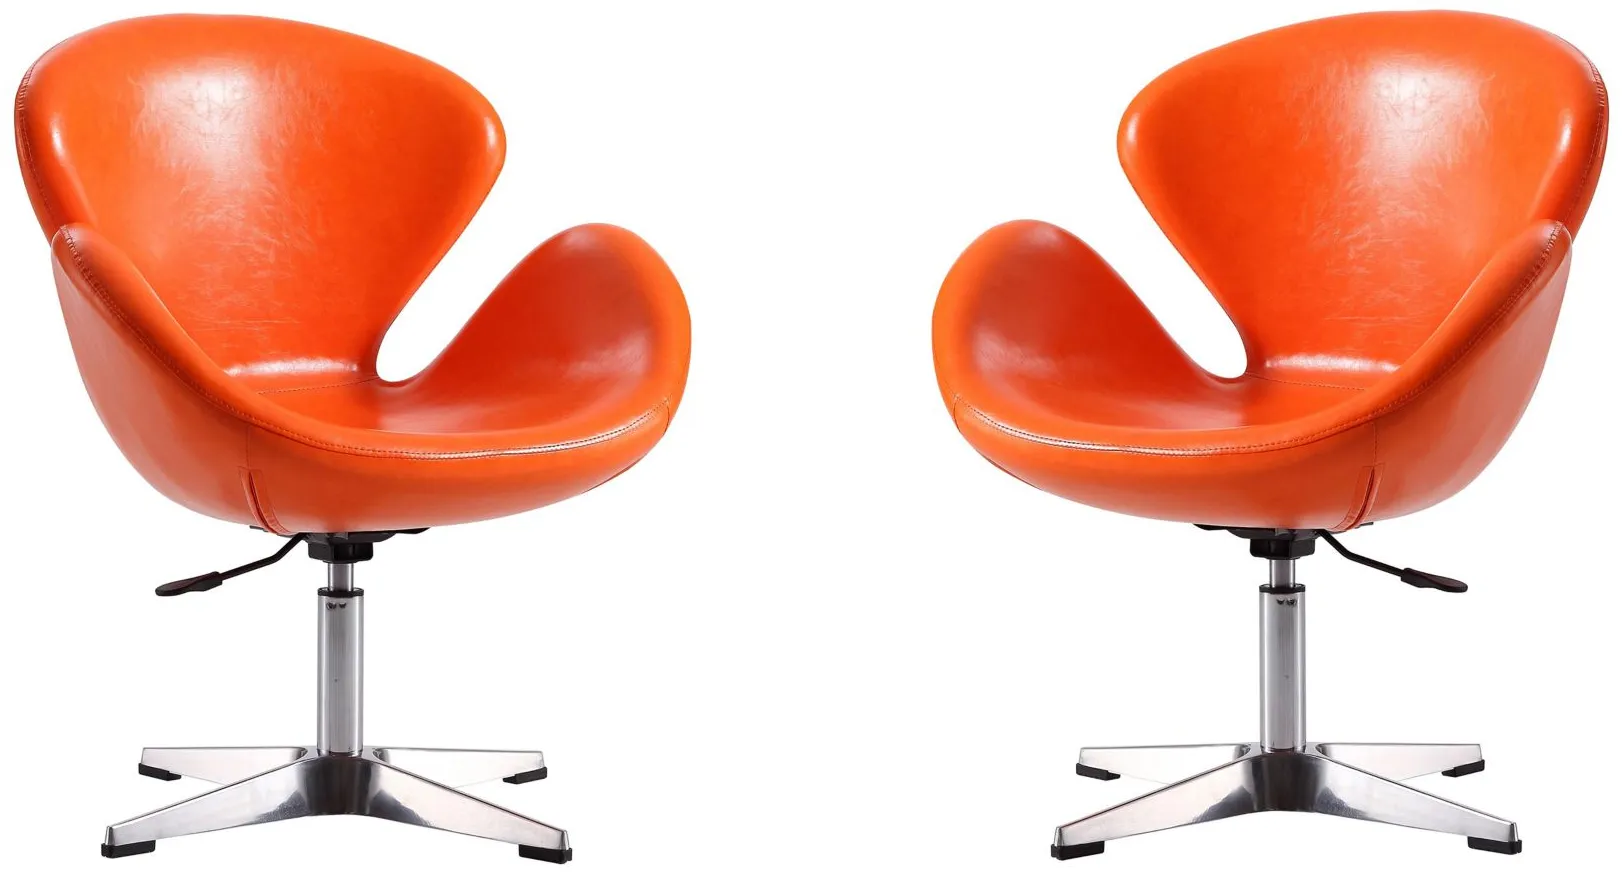 Raspberry Adjustable Swivel Chair (Set of 2) in Tangerine and Polished Chrome by Manhattan Comfort